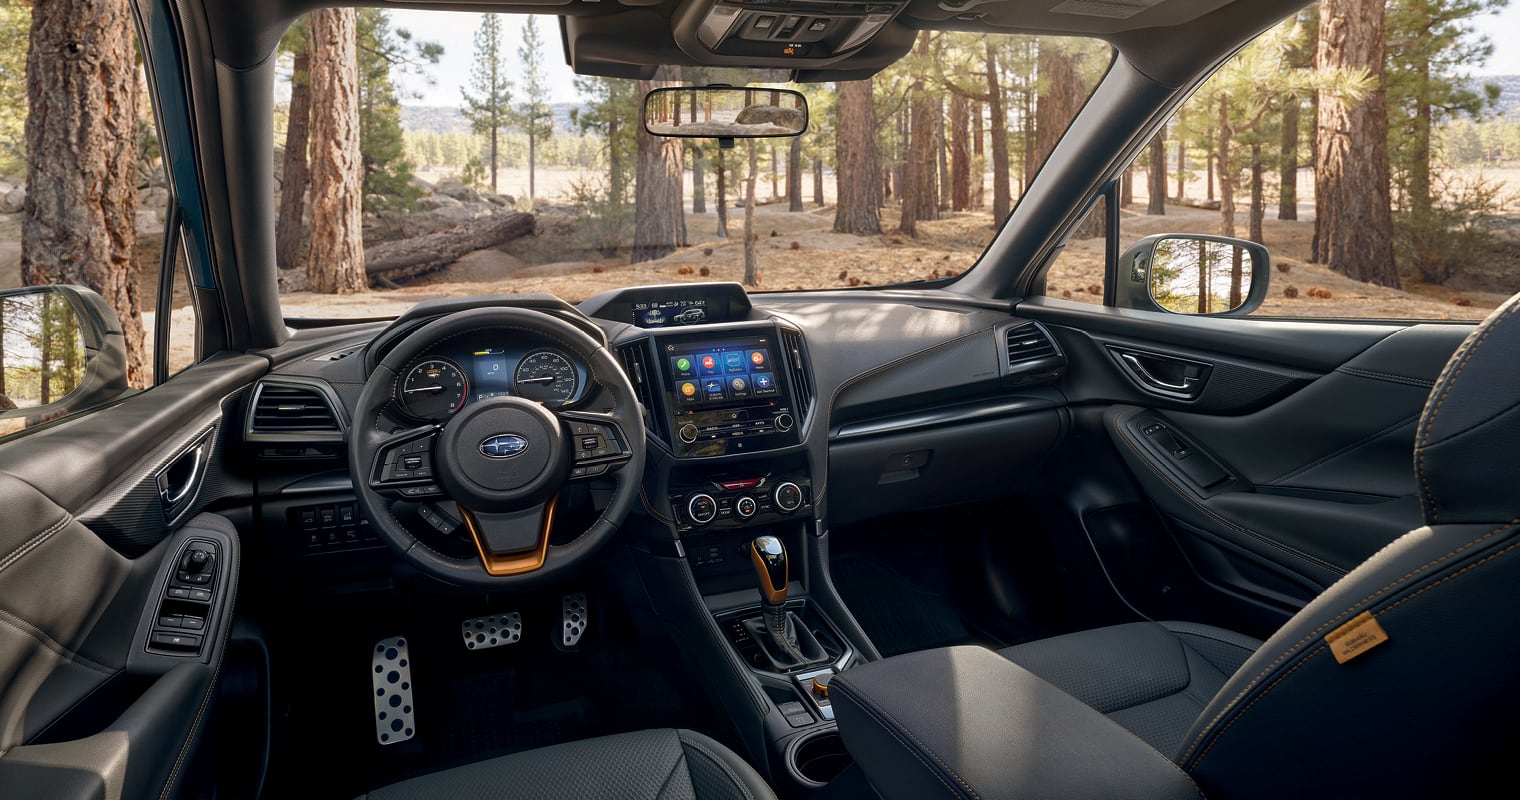 2022 Subaru Forester dashboard and infotainment